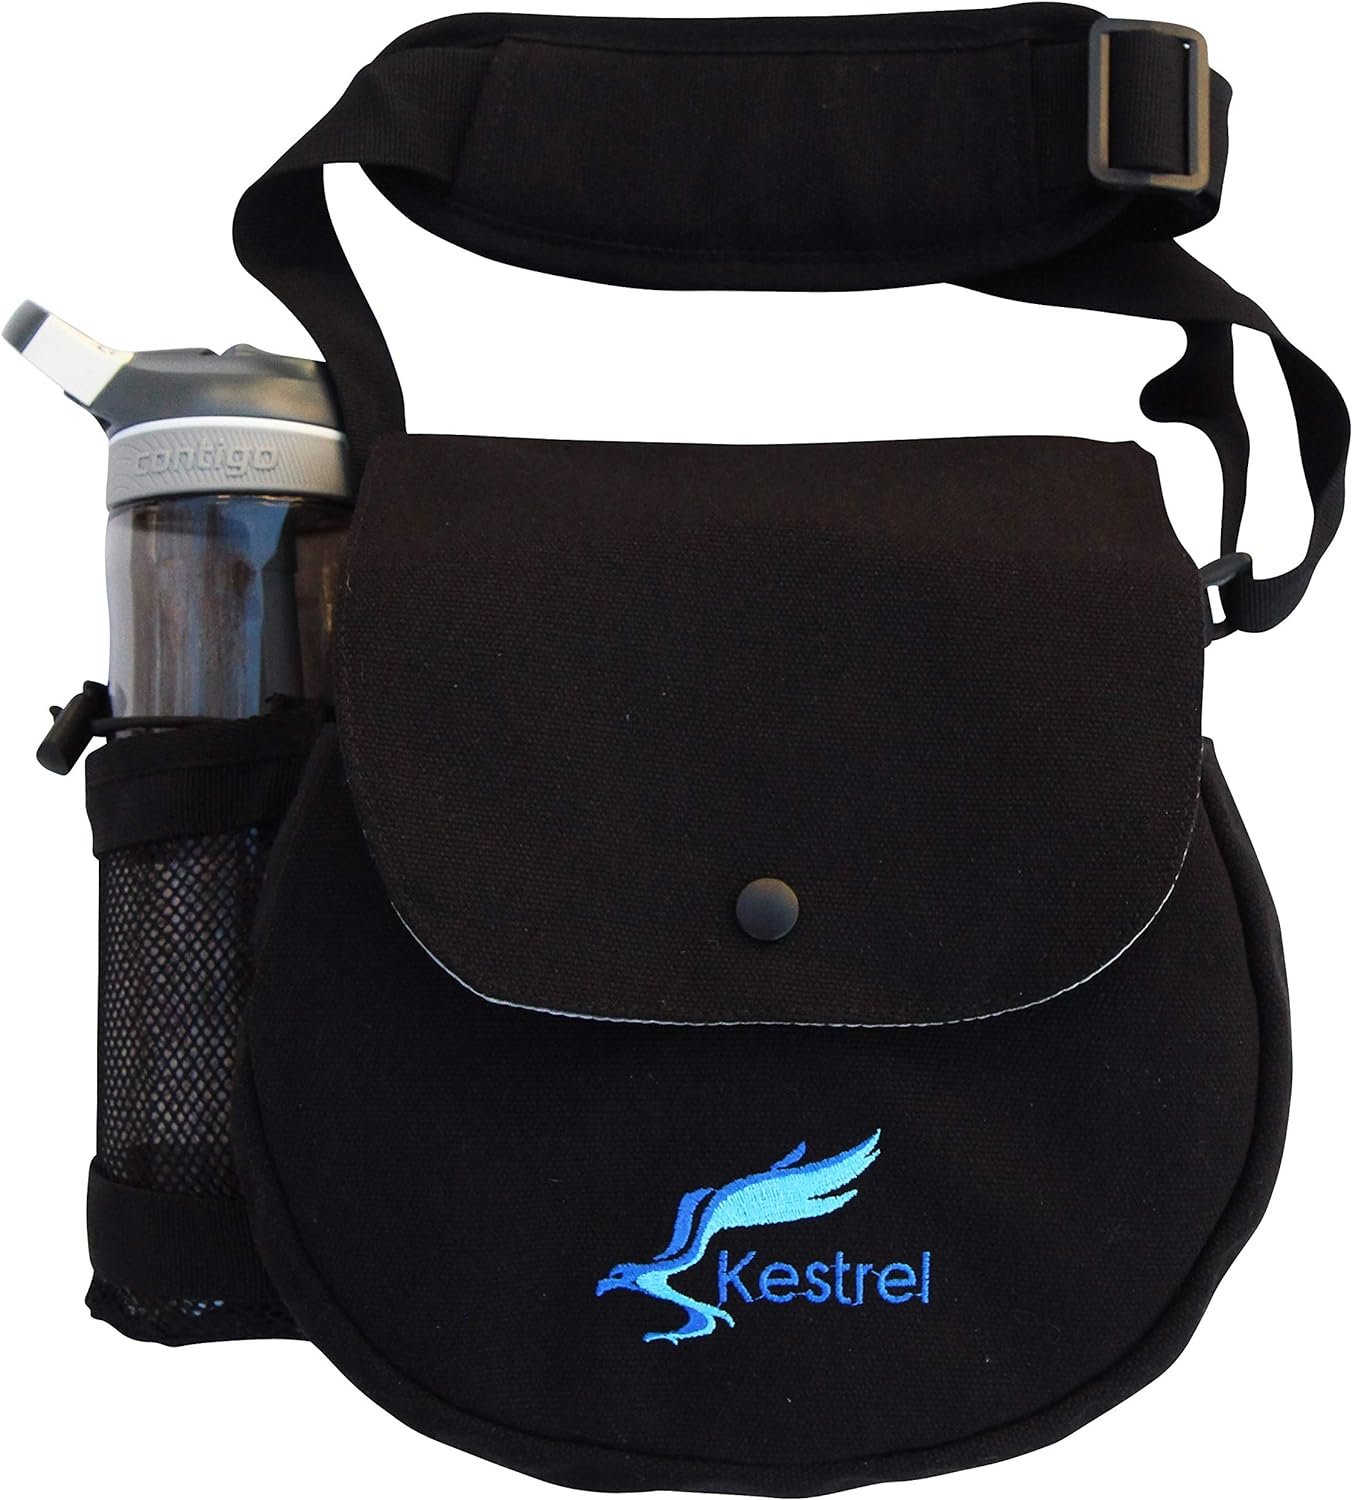 Kestrel Disc Golf Bag | Fits 6-10 Discs + Bottle | for Beginner and Advanced Disc Golf Players | Extremely Durable Canvas | Disc Golf Bag Set | Small Disk Golf Bag